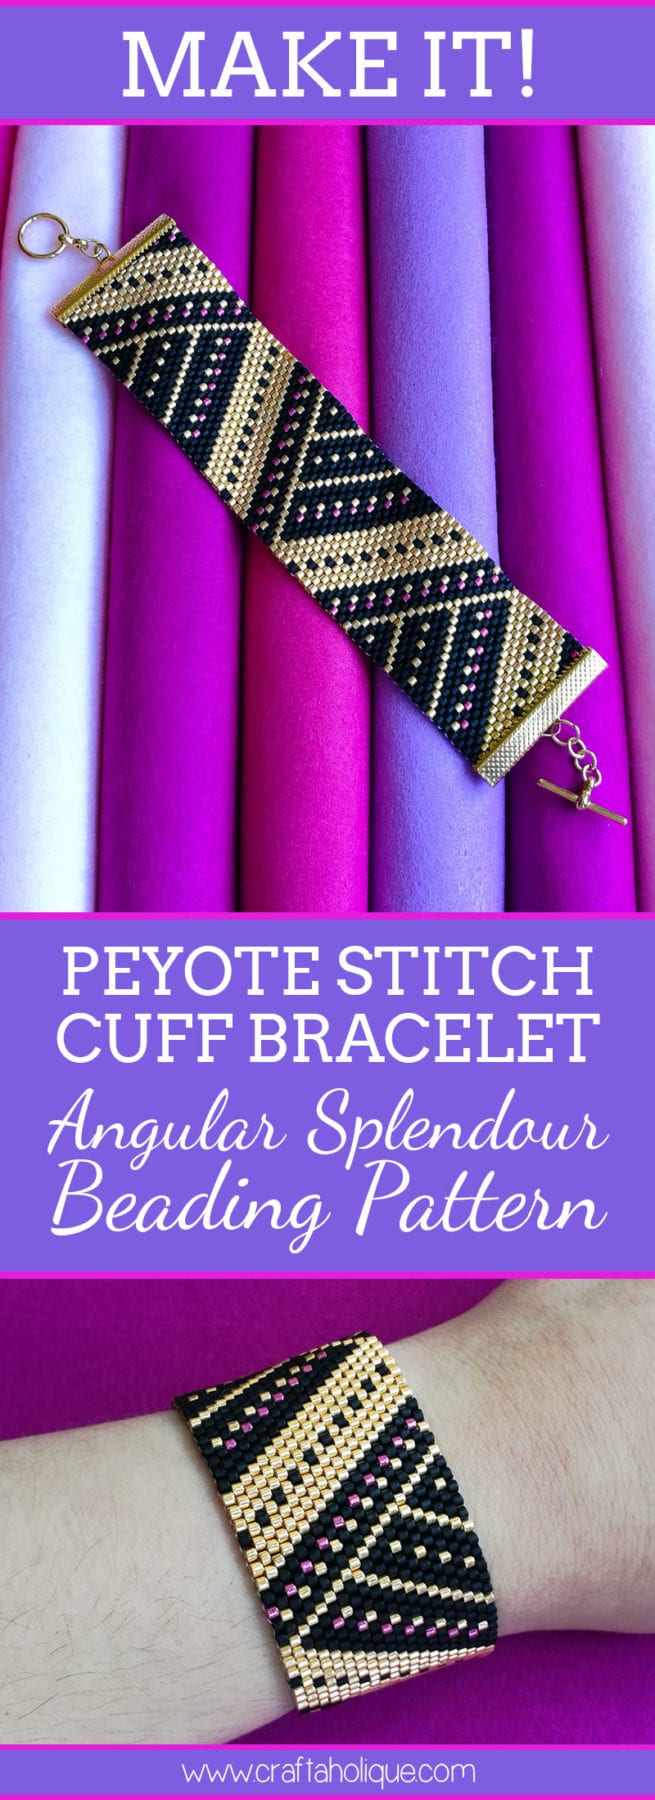 Peyote Stitch Cuff Bracelet Pattern - easy beading project with even count peyote stitch